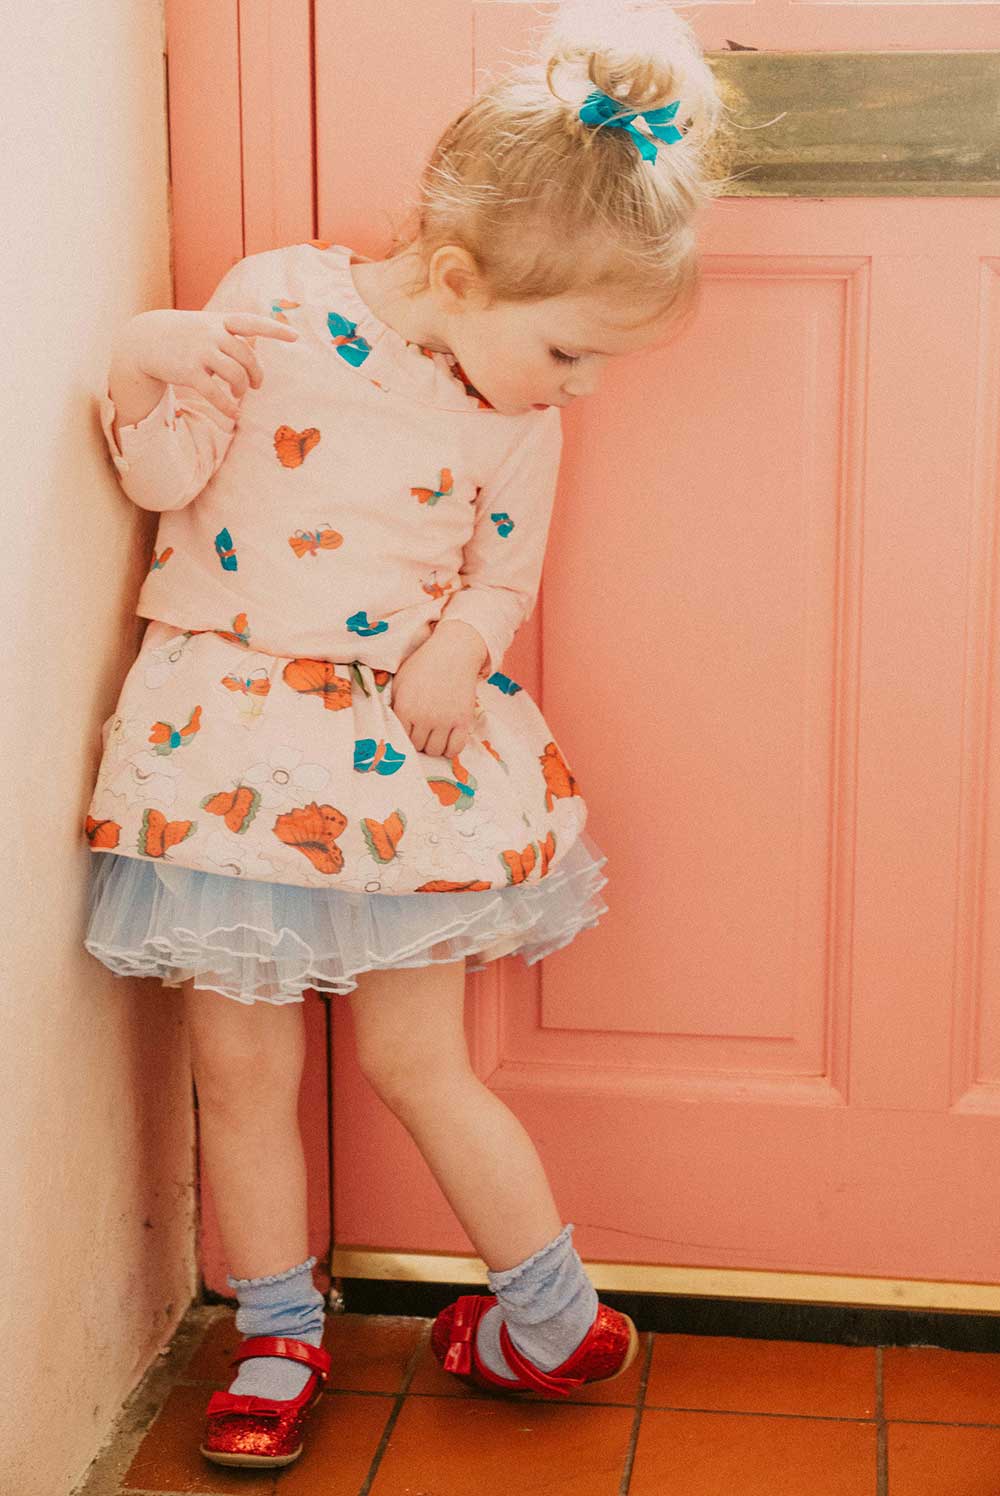 A young girl stood in the kitchen wearing a dress with butterflies on it.